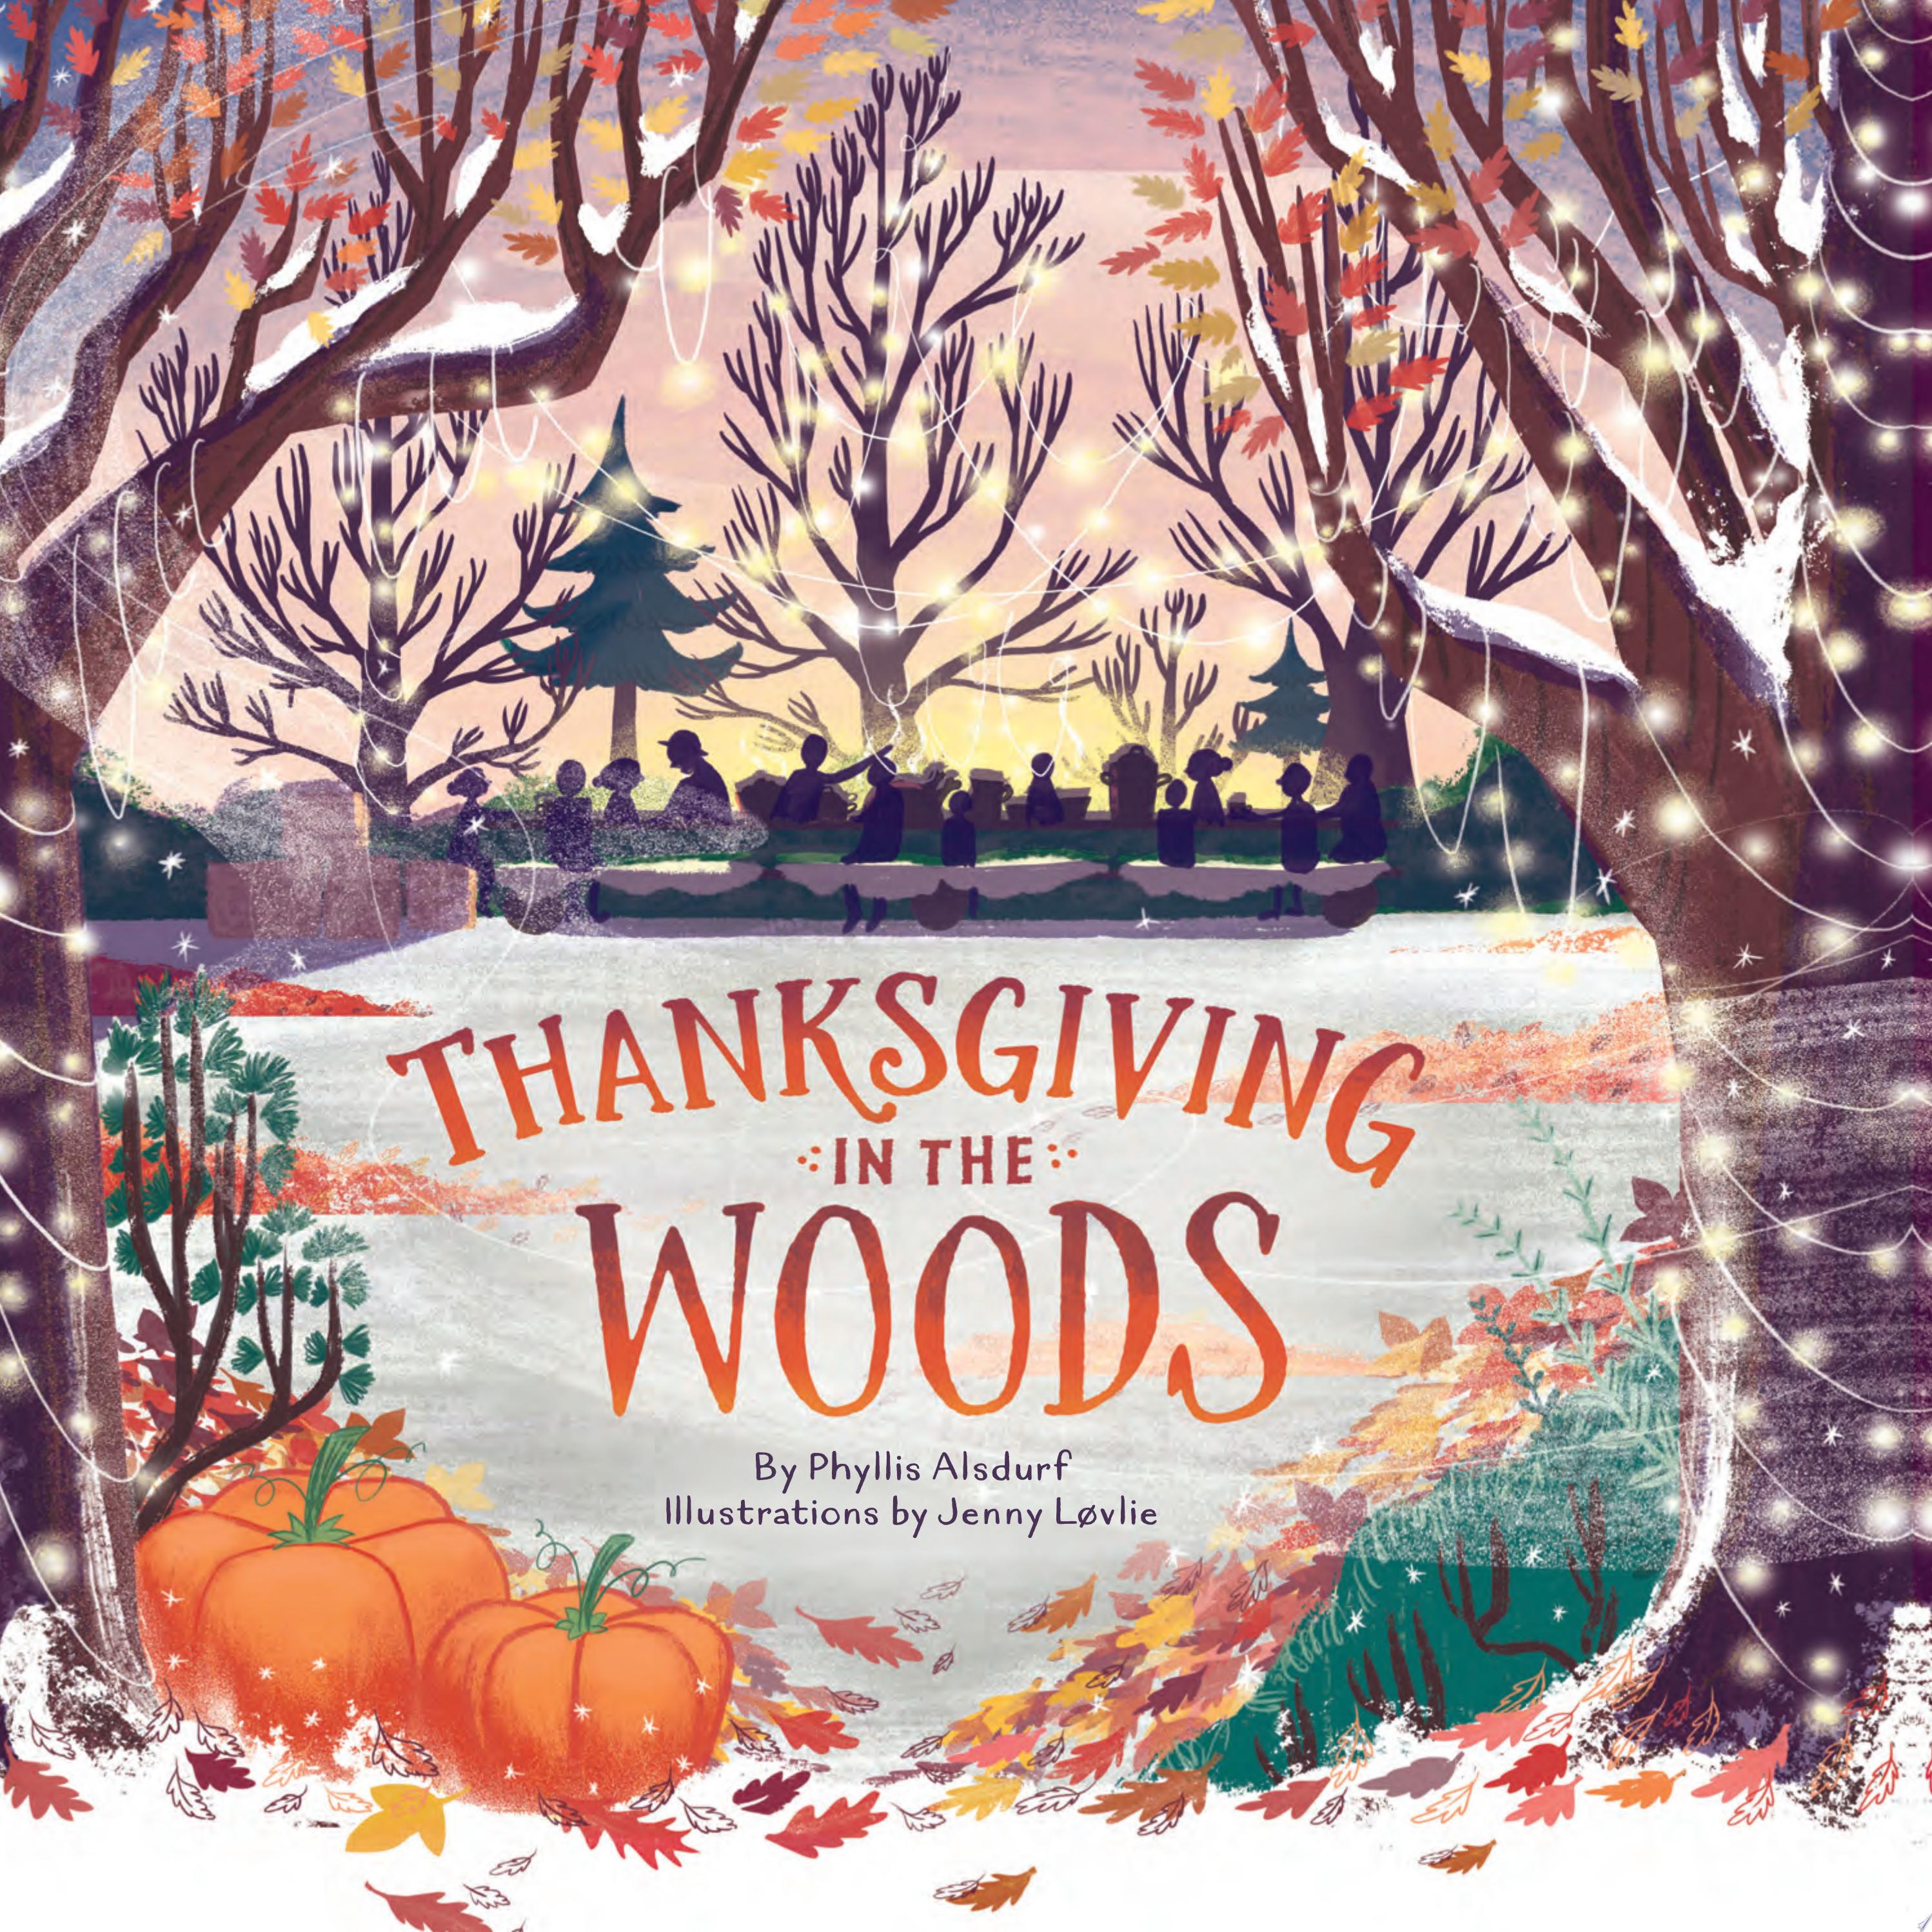 Image for "Thanksgiving in the Woods"